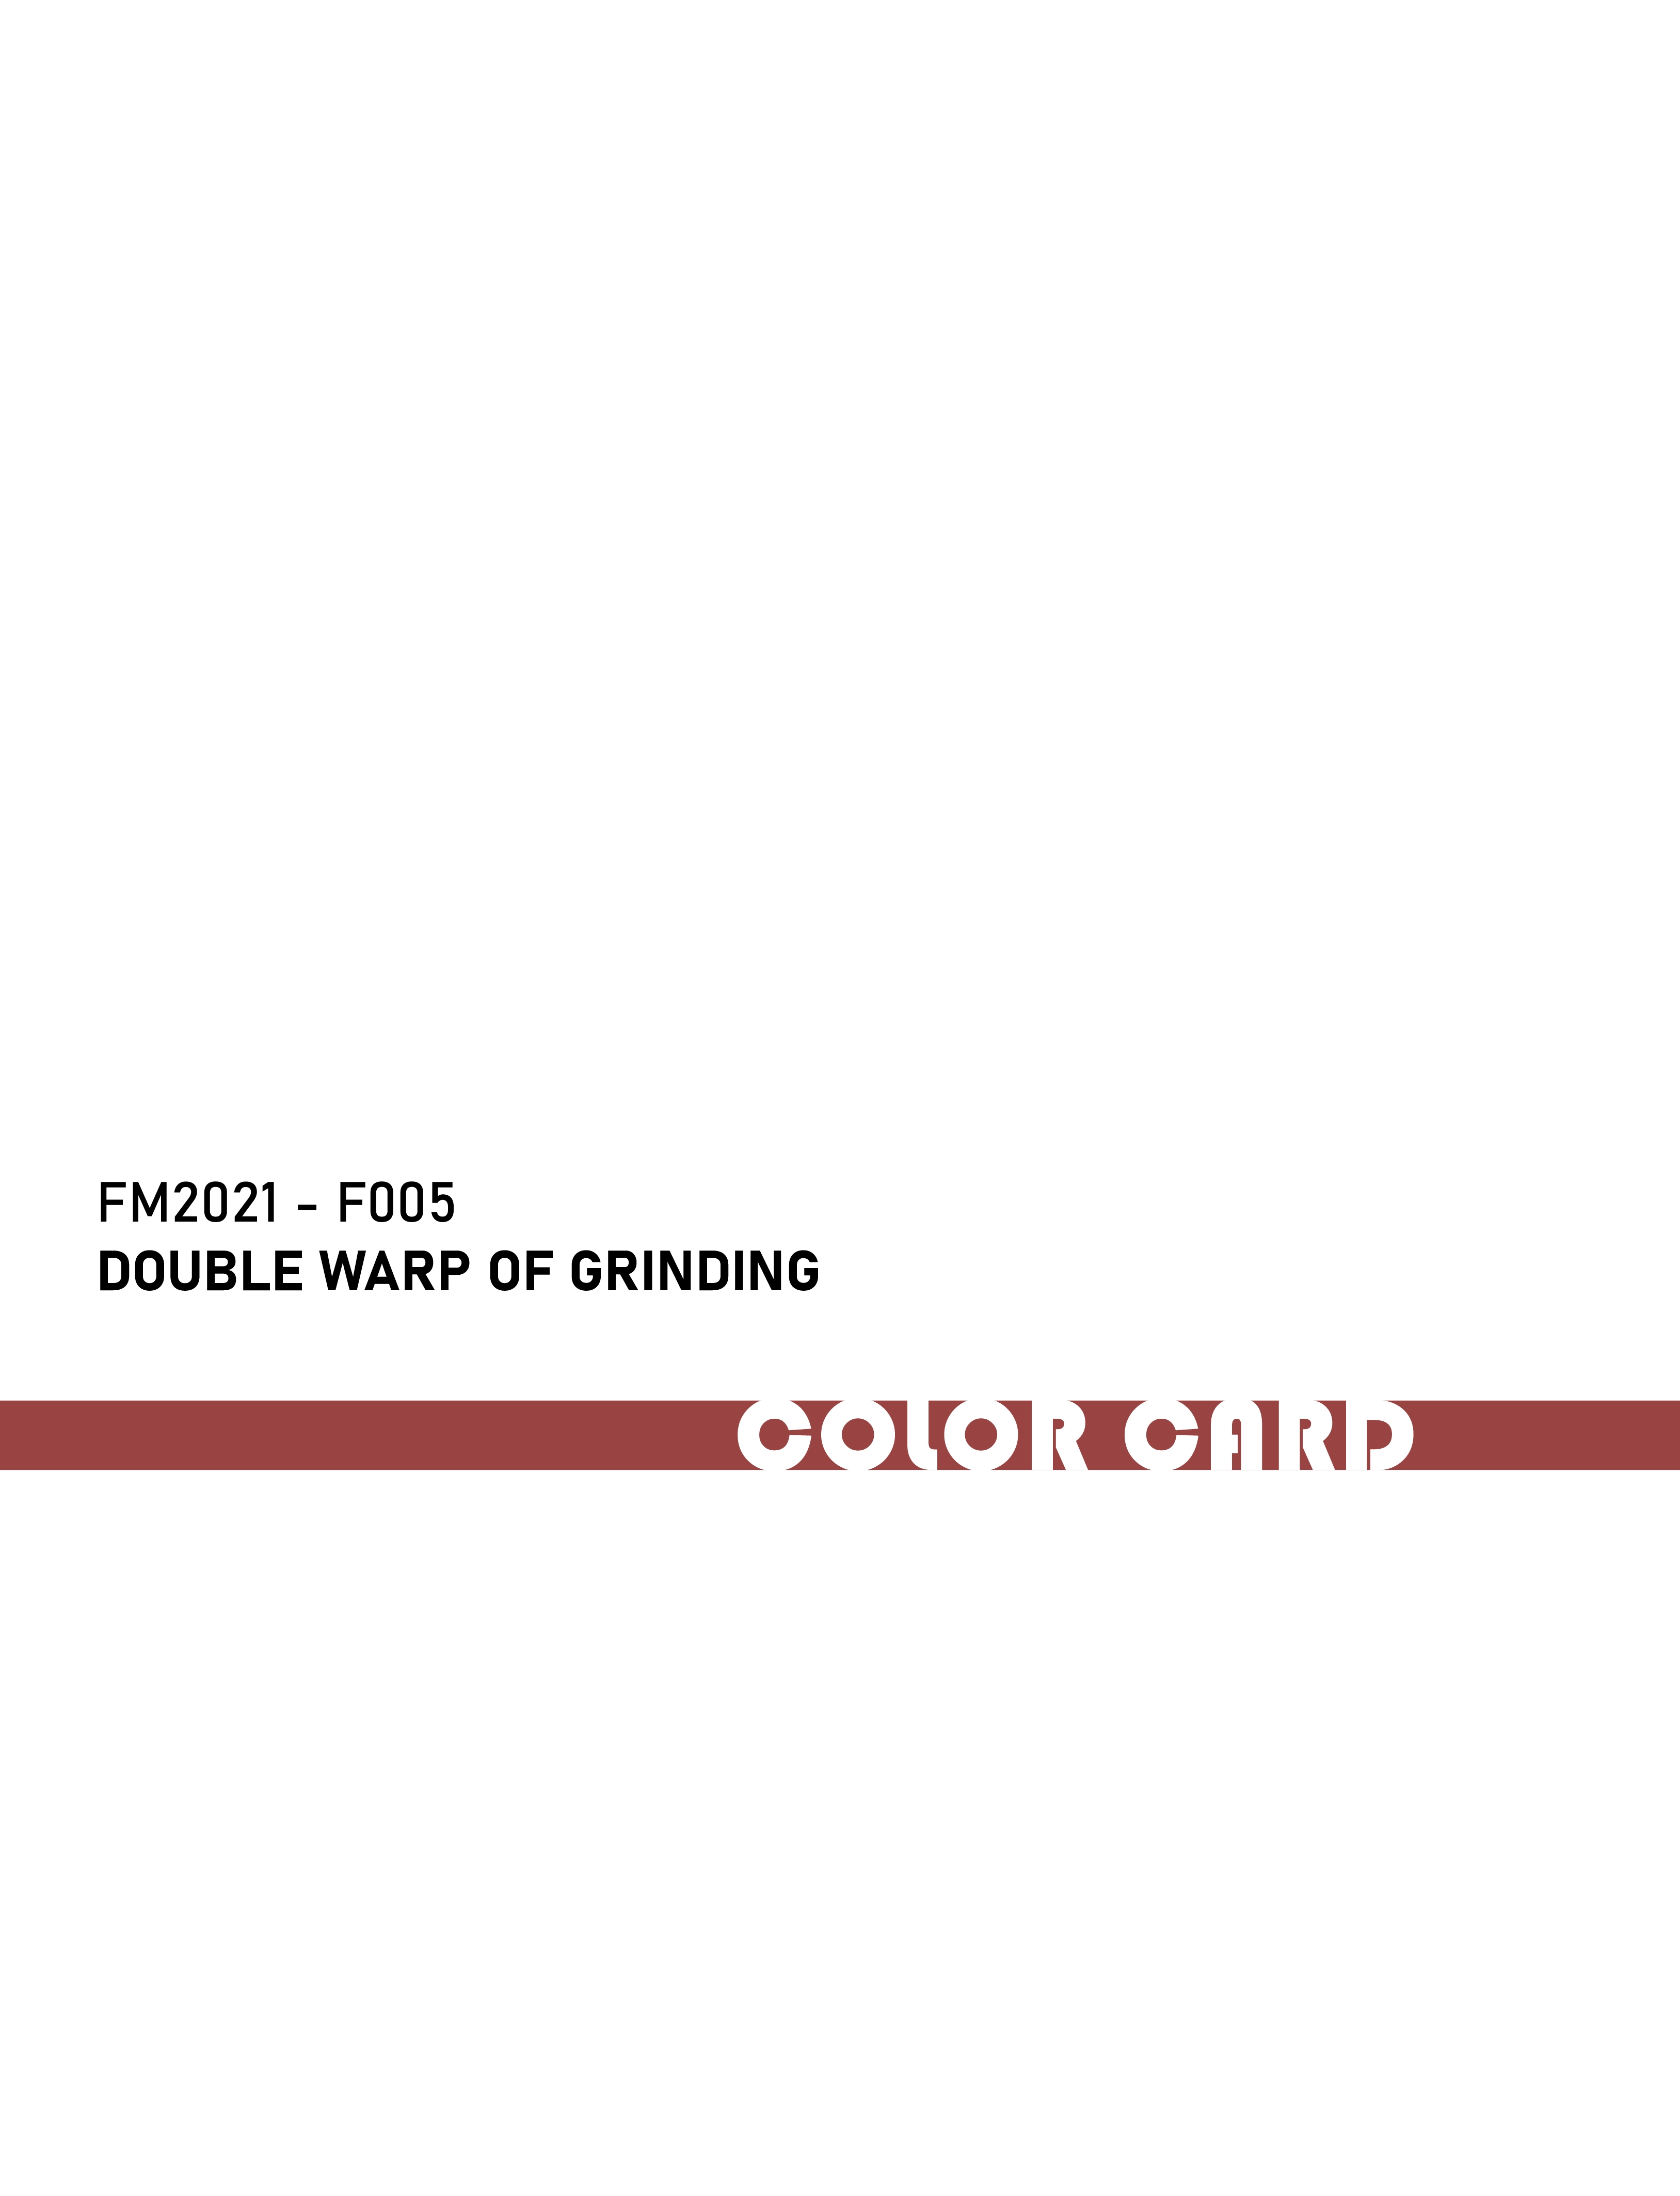 FM2021-F005 Double Wrap of Grinding